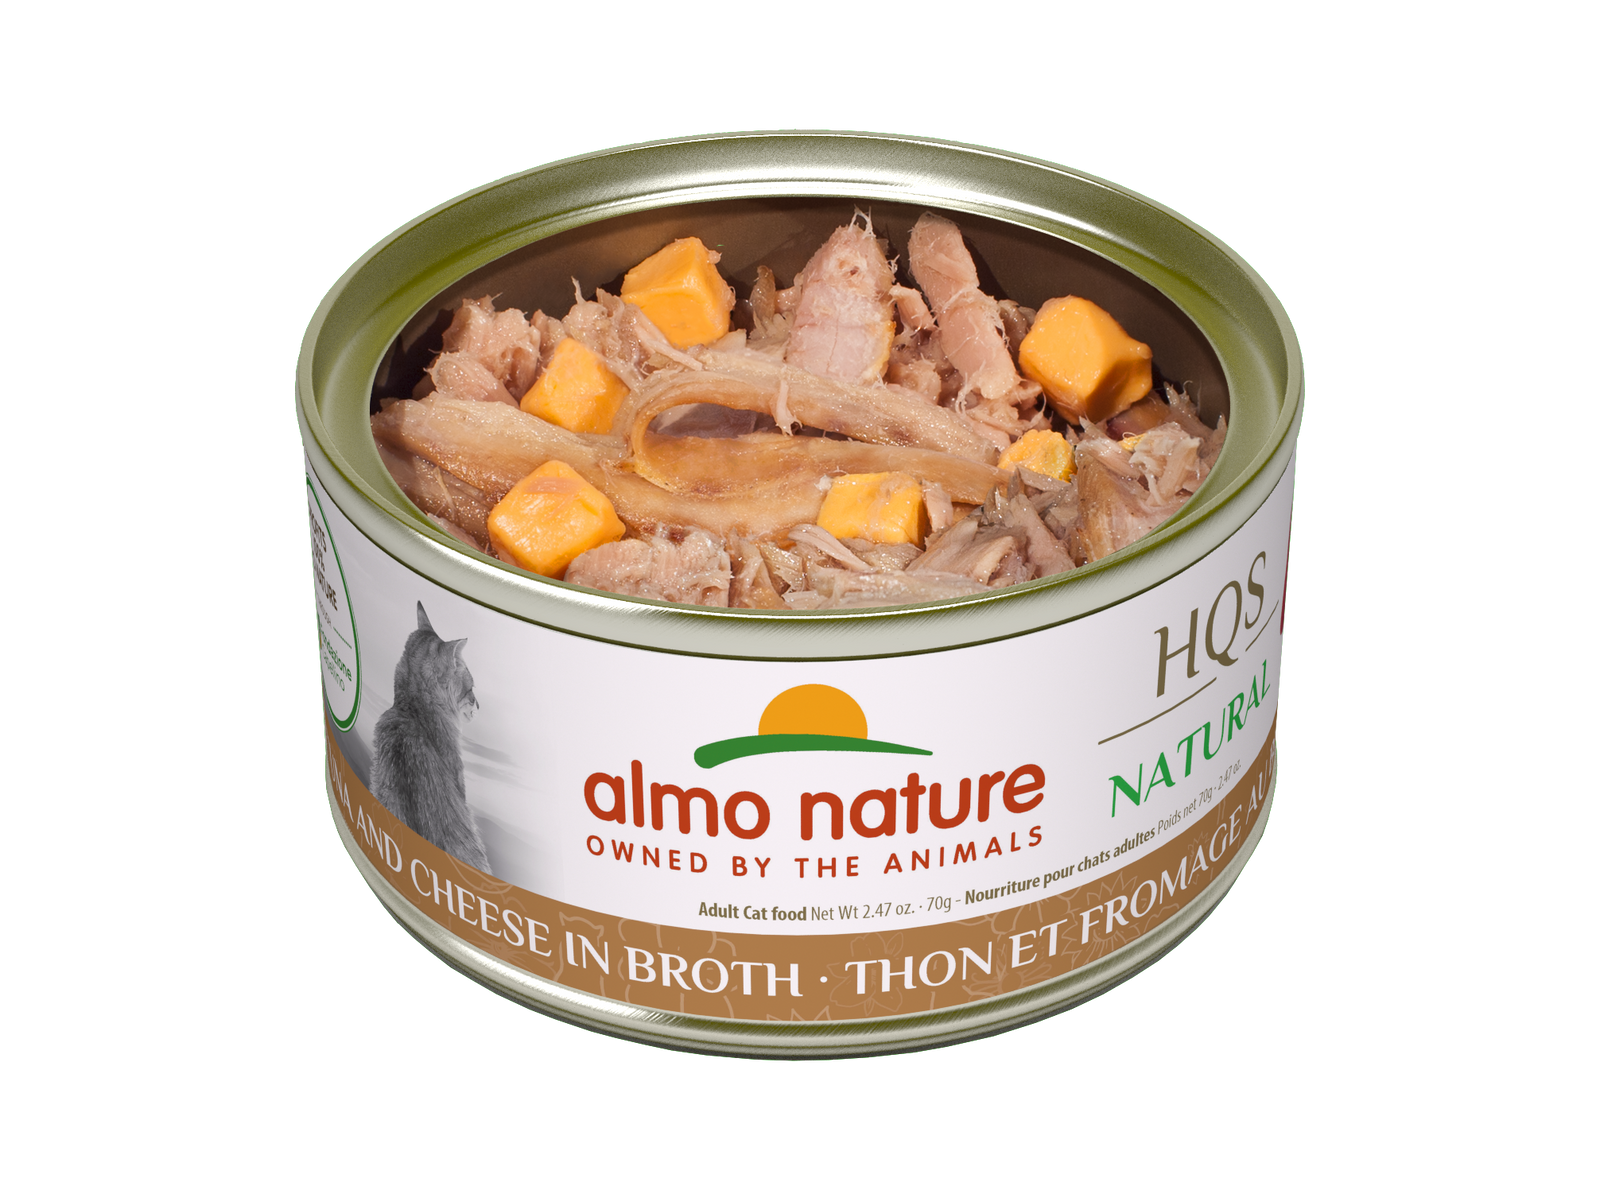 Almo Nature Natural Tuna & Cheese Canned Cat Food